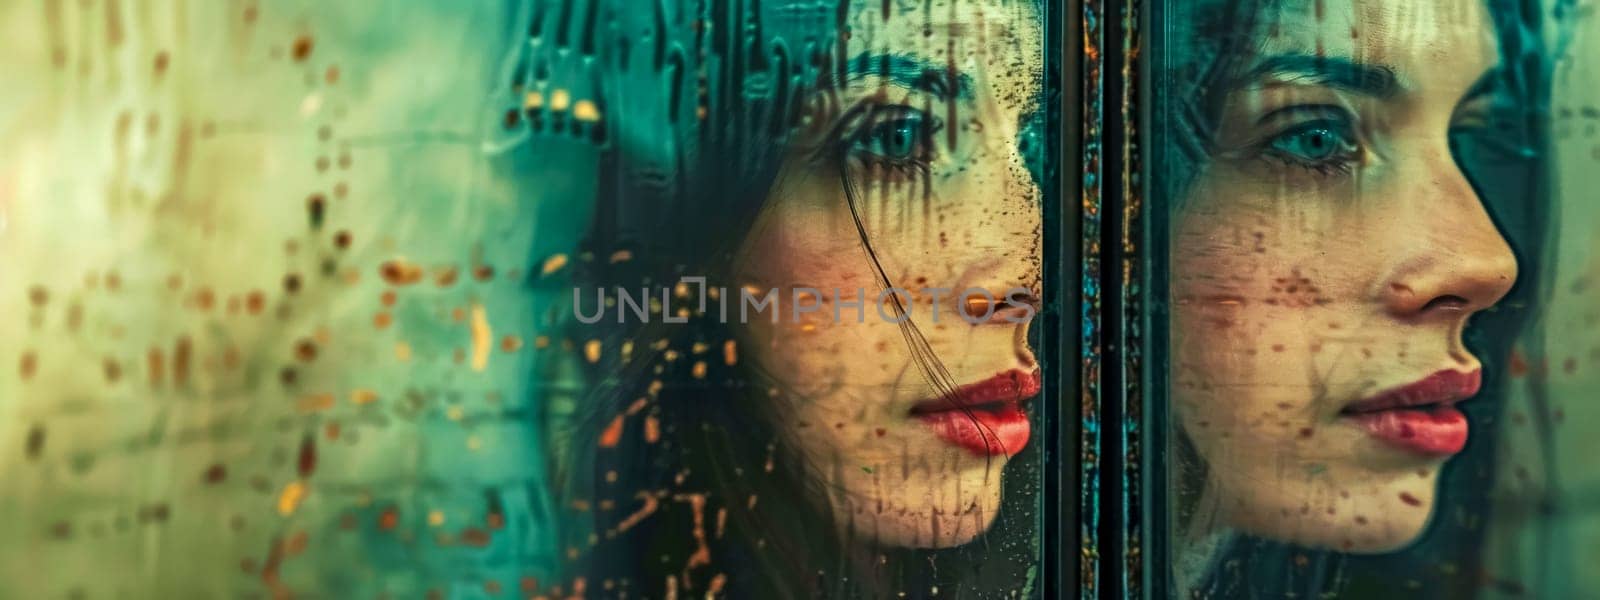 Close-up of a pensive woman's reflection on a window dappled with raindrops